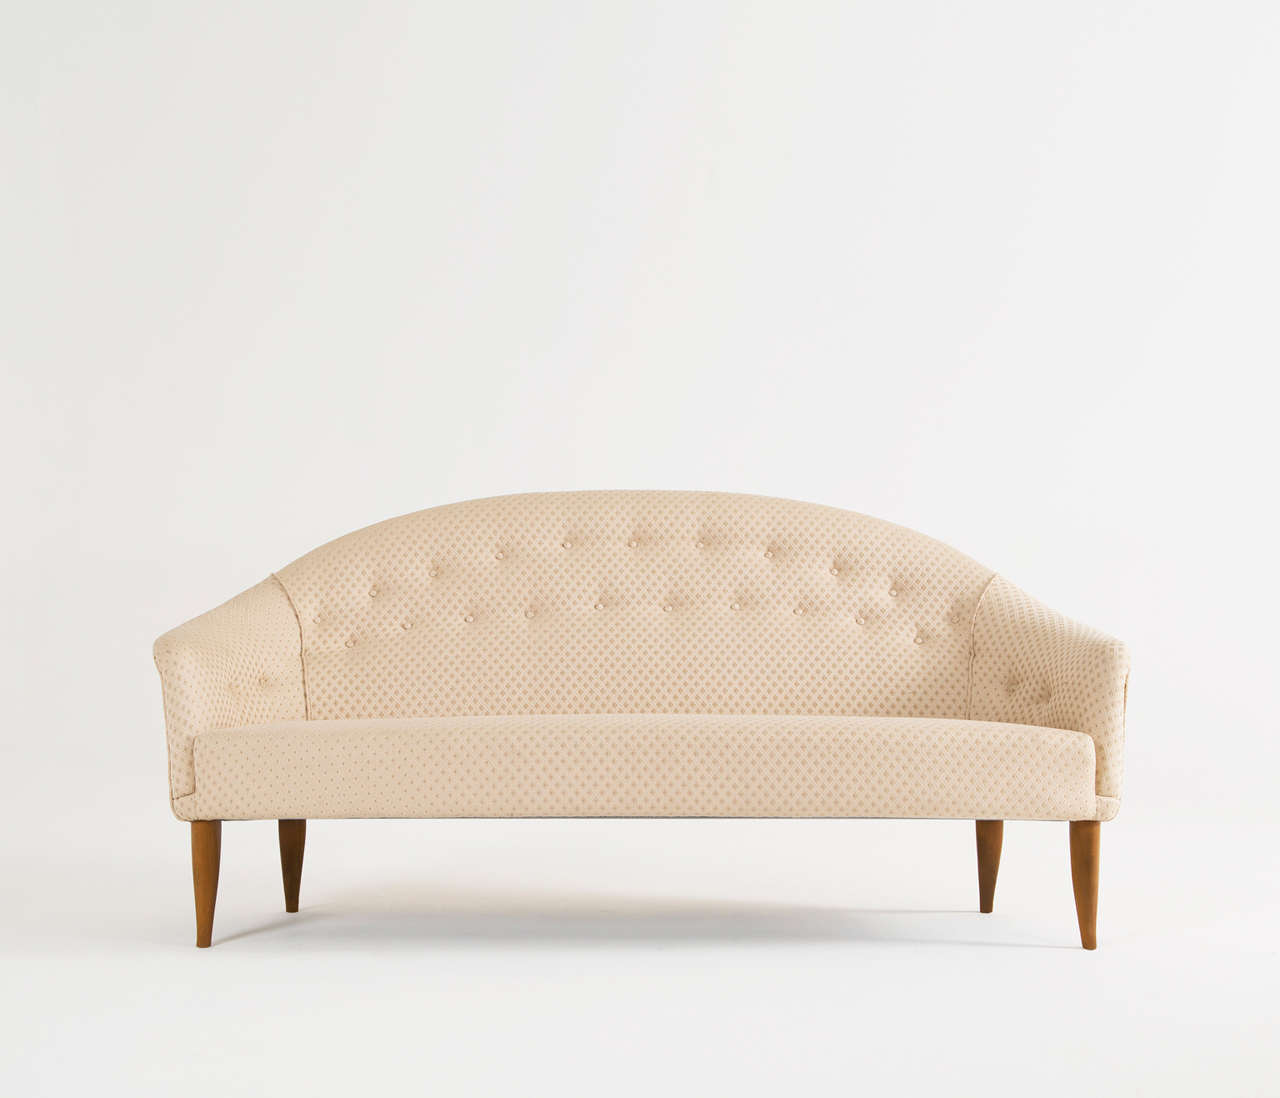 Kerstin Horlin Holmqvist for Nordiska Kompaniet, sofa 'Stora paradiset', fabric, wood, Sweden, circa 1958.

The beautifully tapered and curved legs compliment the design of the seat perfectly. The armrests run over smoothly into the back and